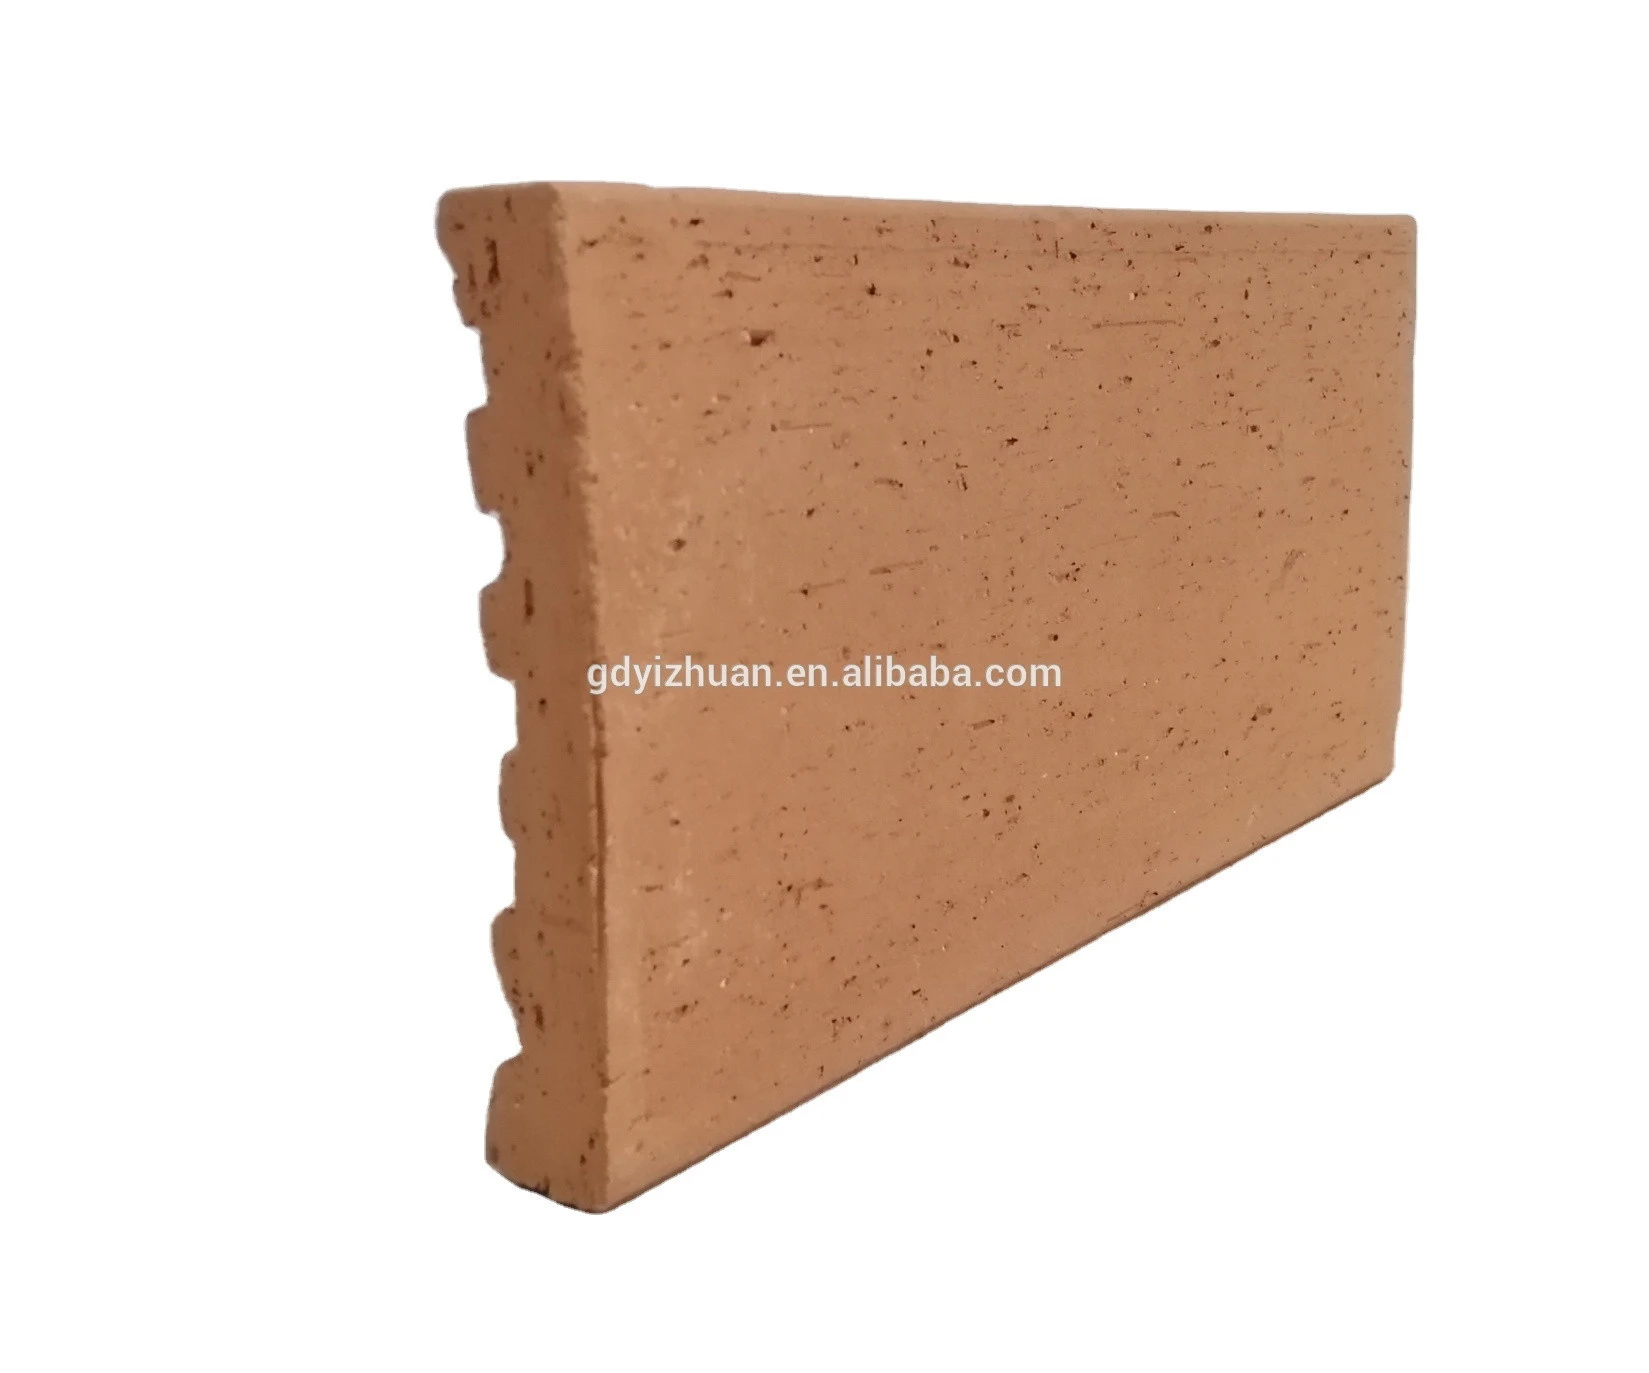 China Supplier Cheap Price Beautiful Color Paving brick